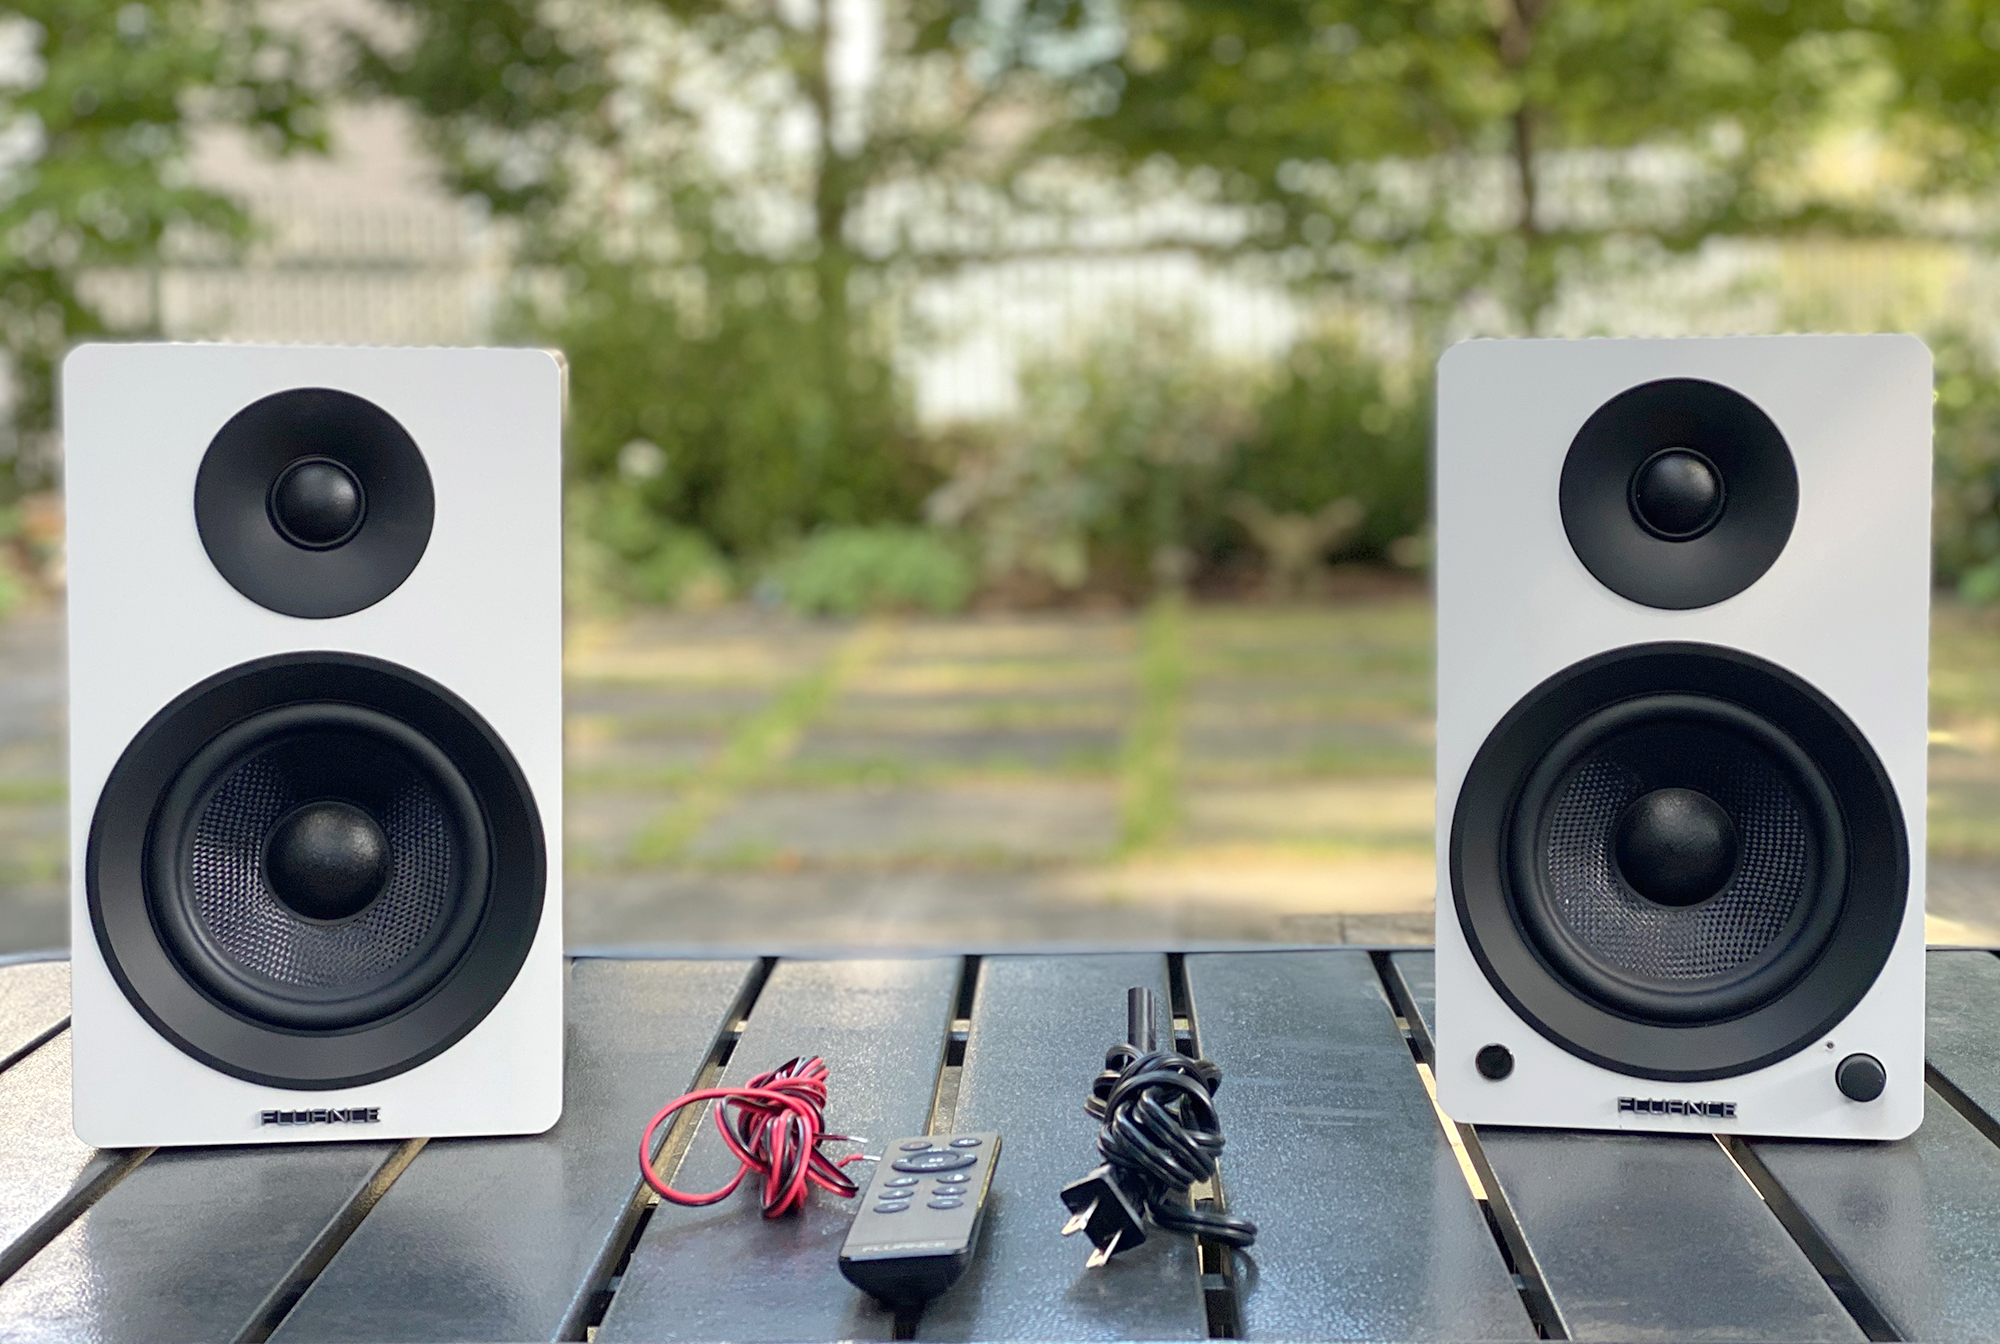 Fluance Ai41 speakers with accessories